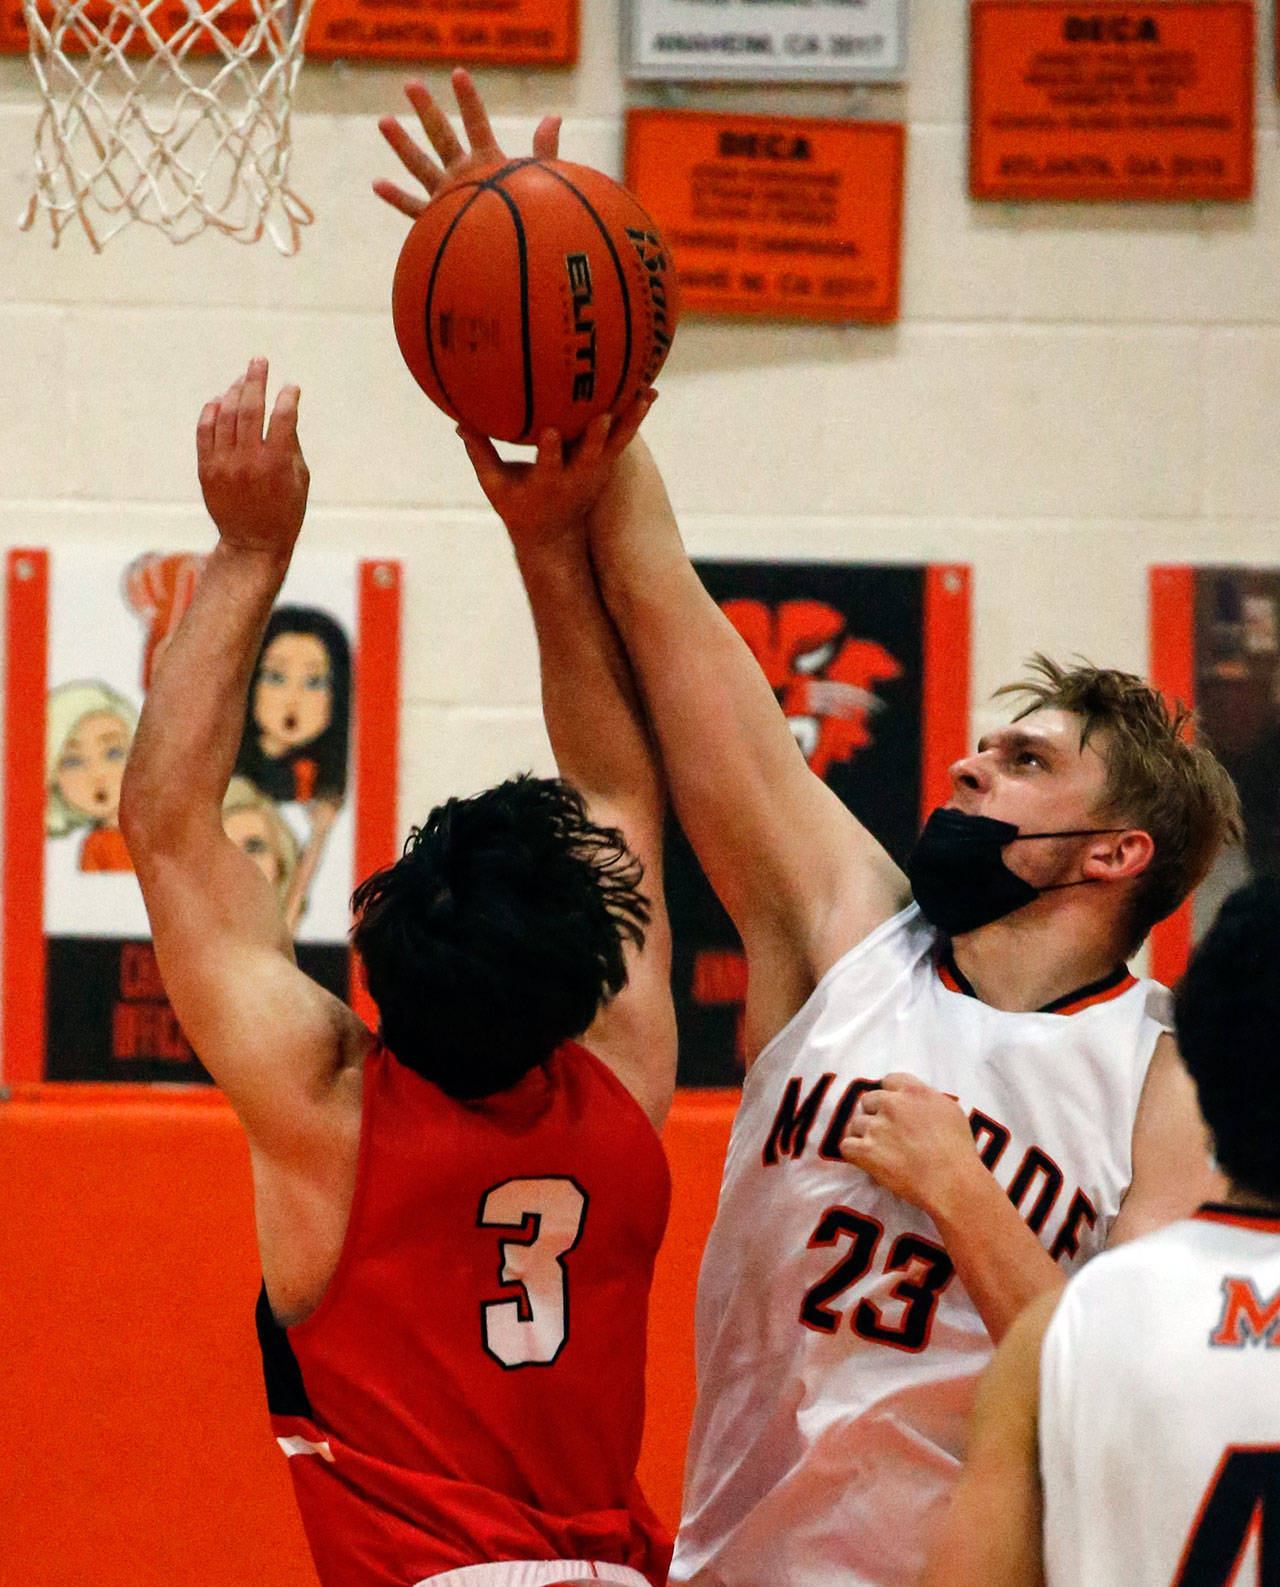 Monroe’s Sam Olson (23) blocks a shot attempt from Snohomish’s Josh Vandergriend during a game on May 11, 2021, at Monroe High School. The Bearcats won 36-35. (Kevin Clark / The Herald)